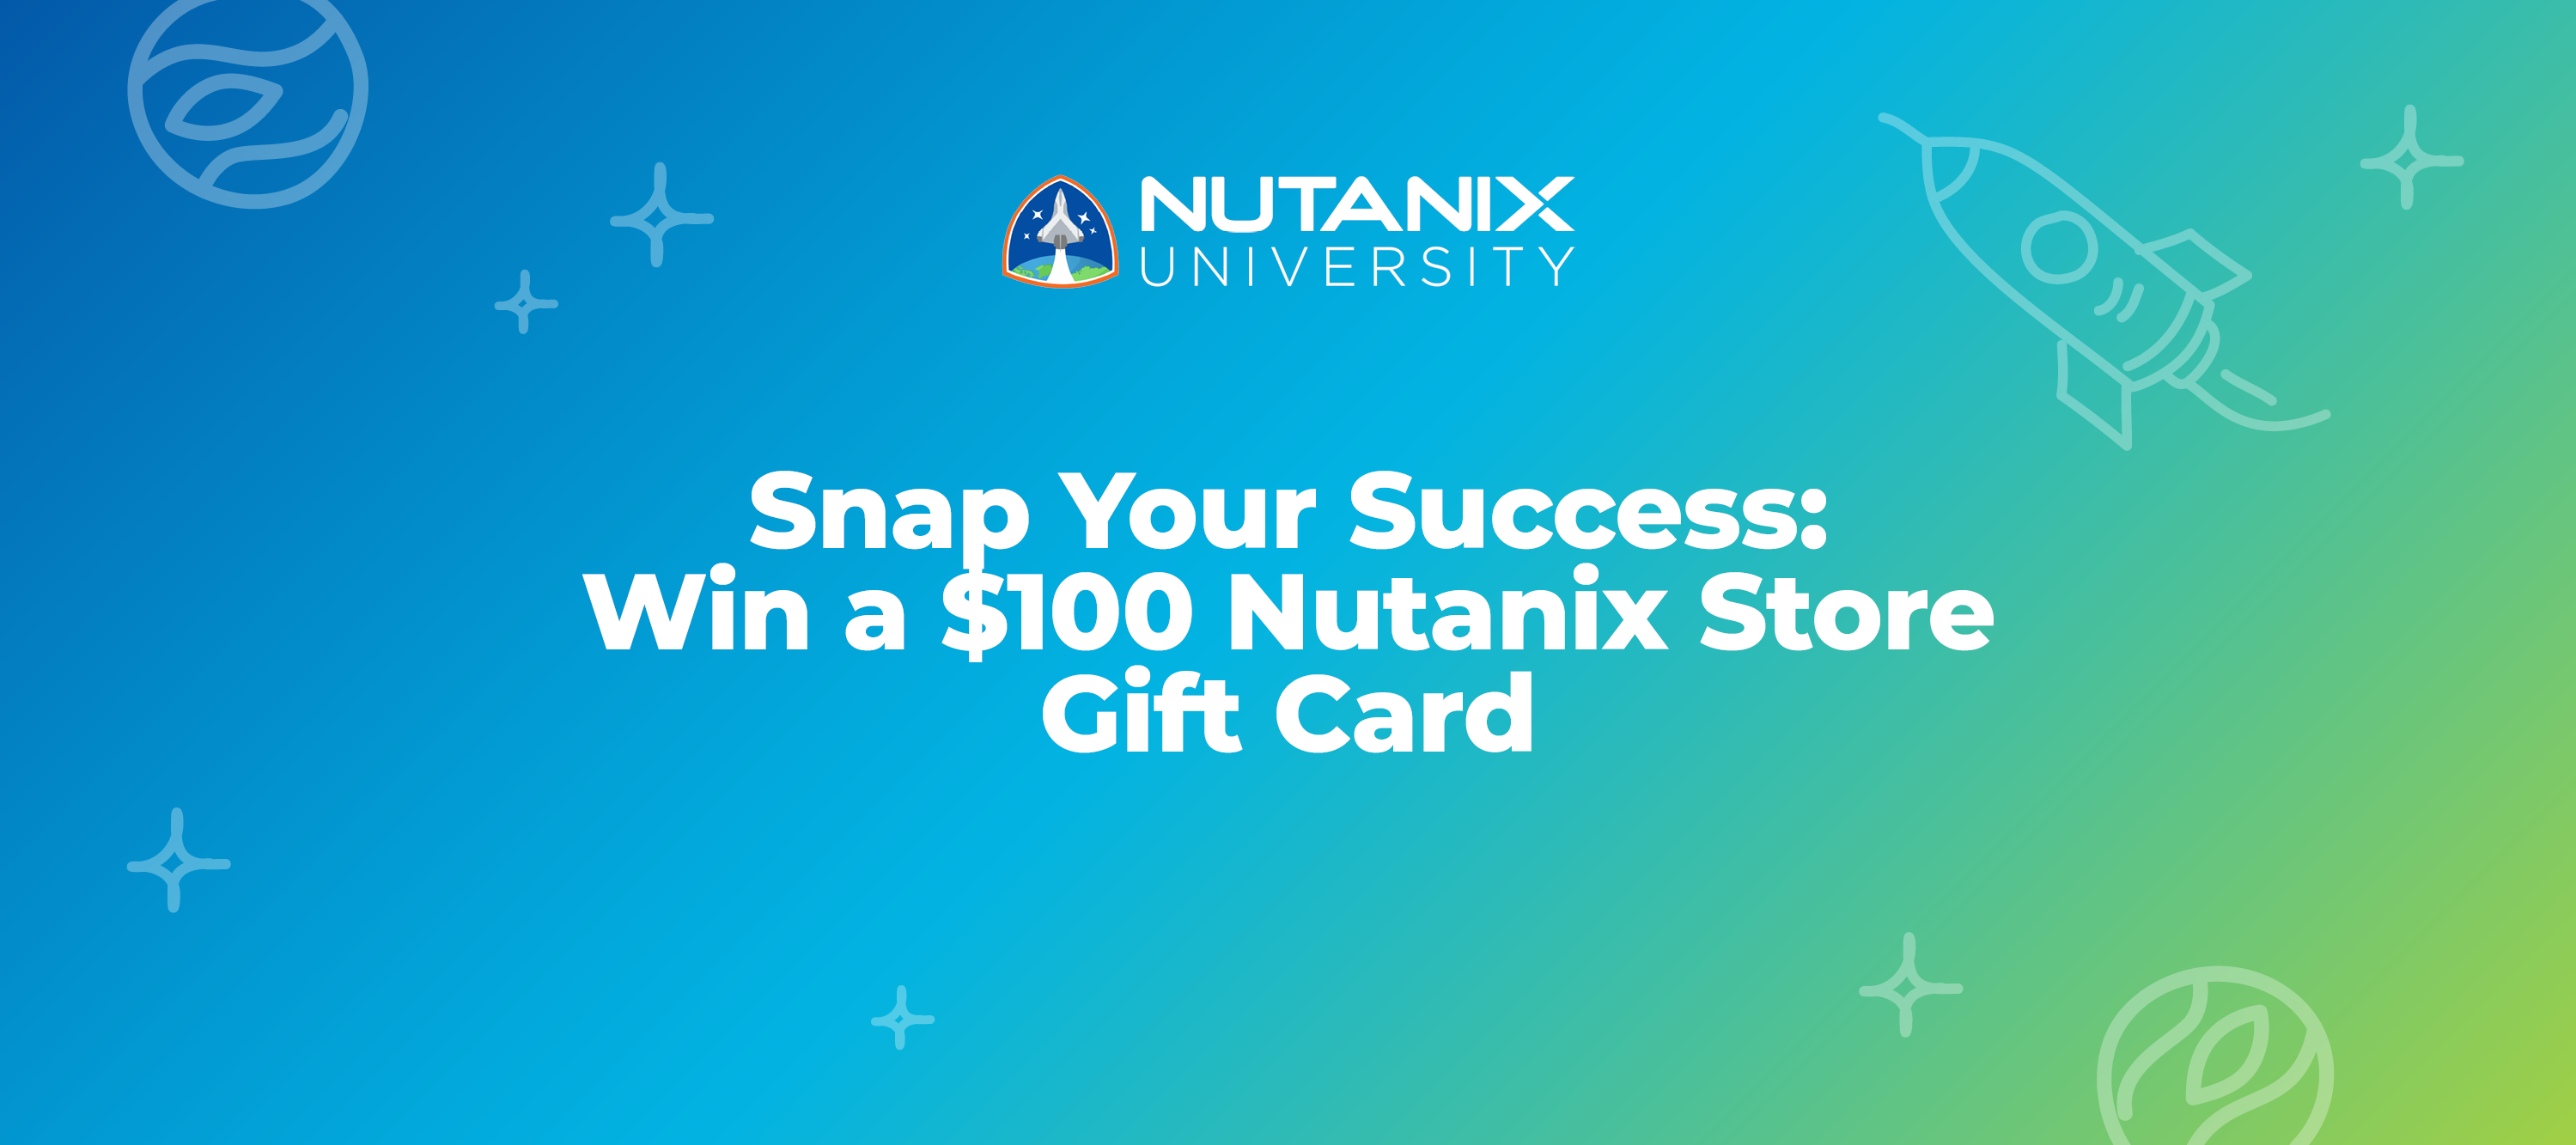 Snap Your Success: Win a $100 Nutanix Store Gift Card